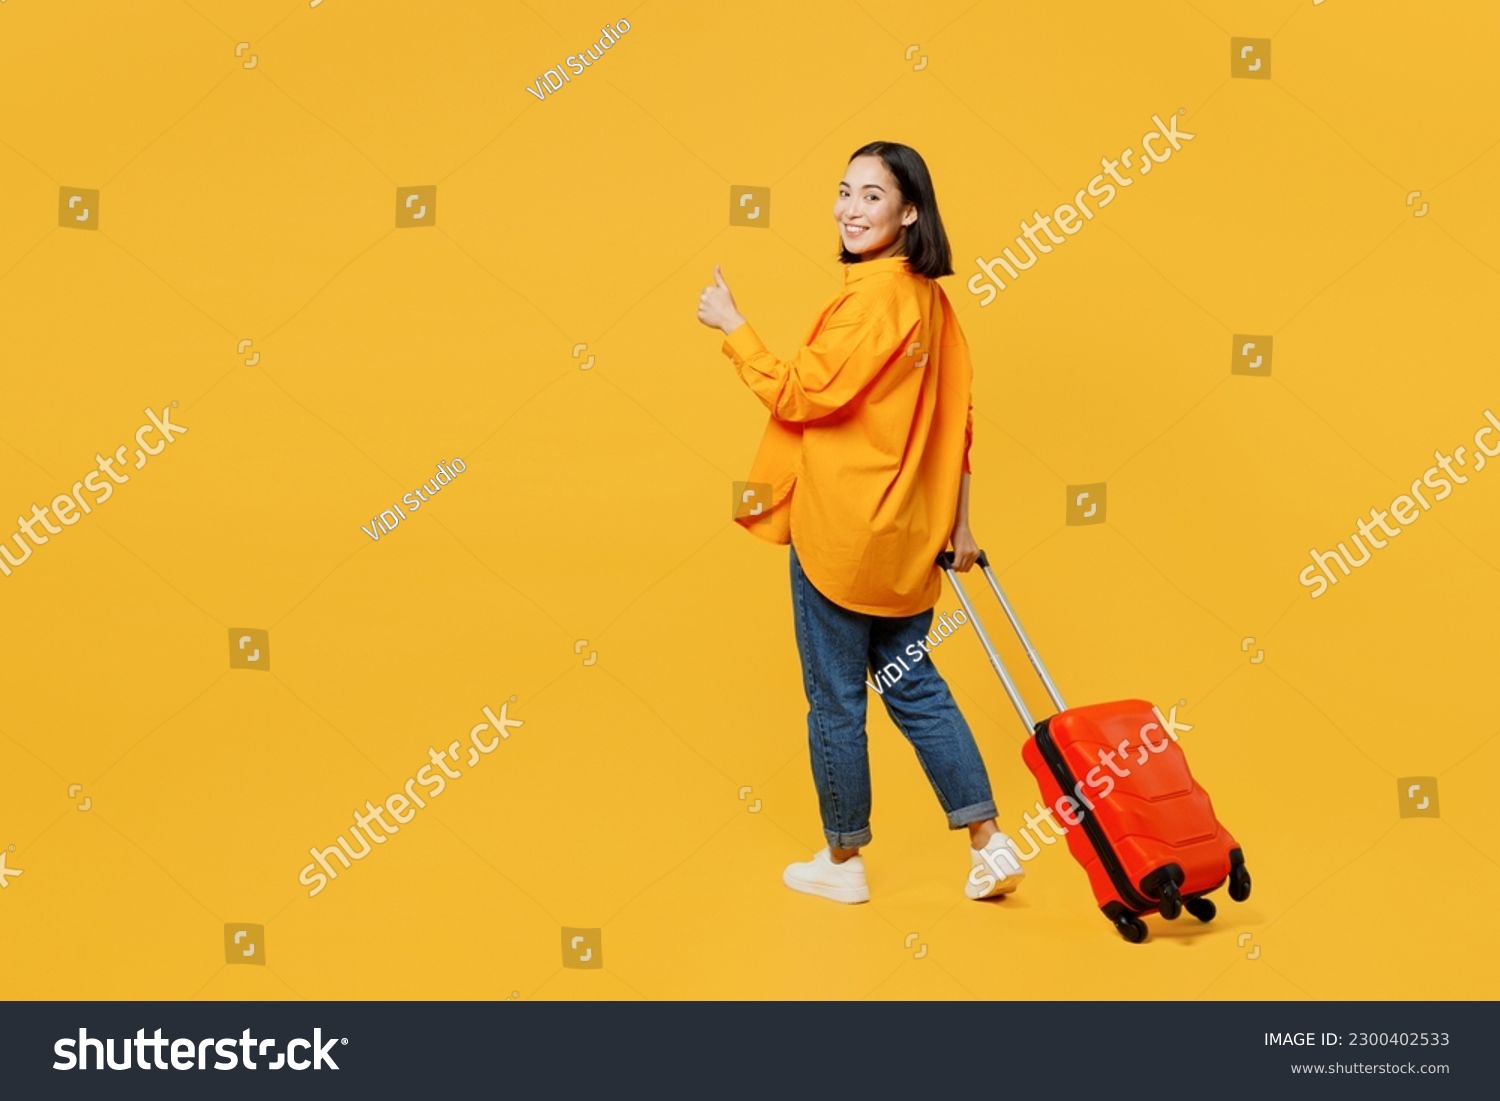 Back view young woman wear summer clothes walk go with suitcase bag show thumb up isolated on plain yellow background. Tourist travel abroad in free time rest getaway. Air flight trip journey concept #2300402533